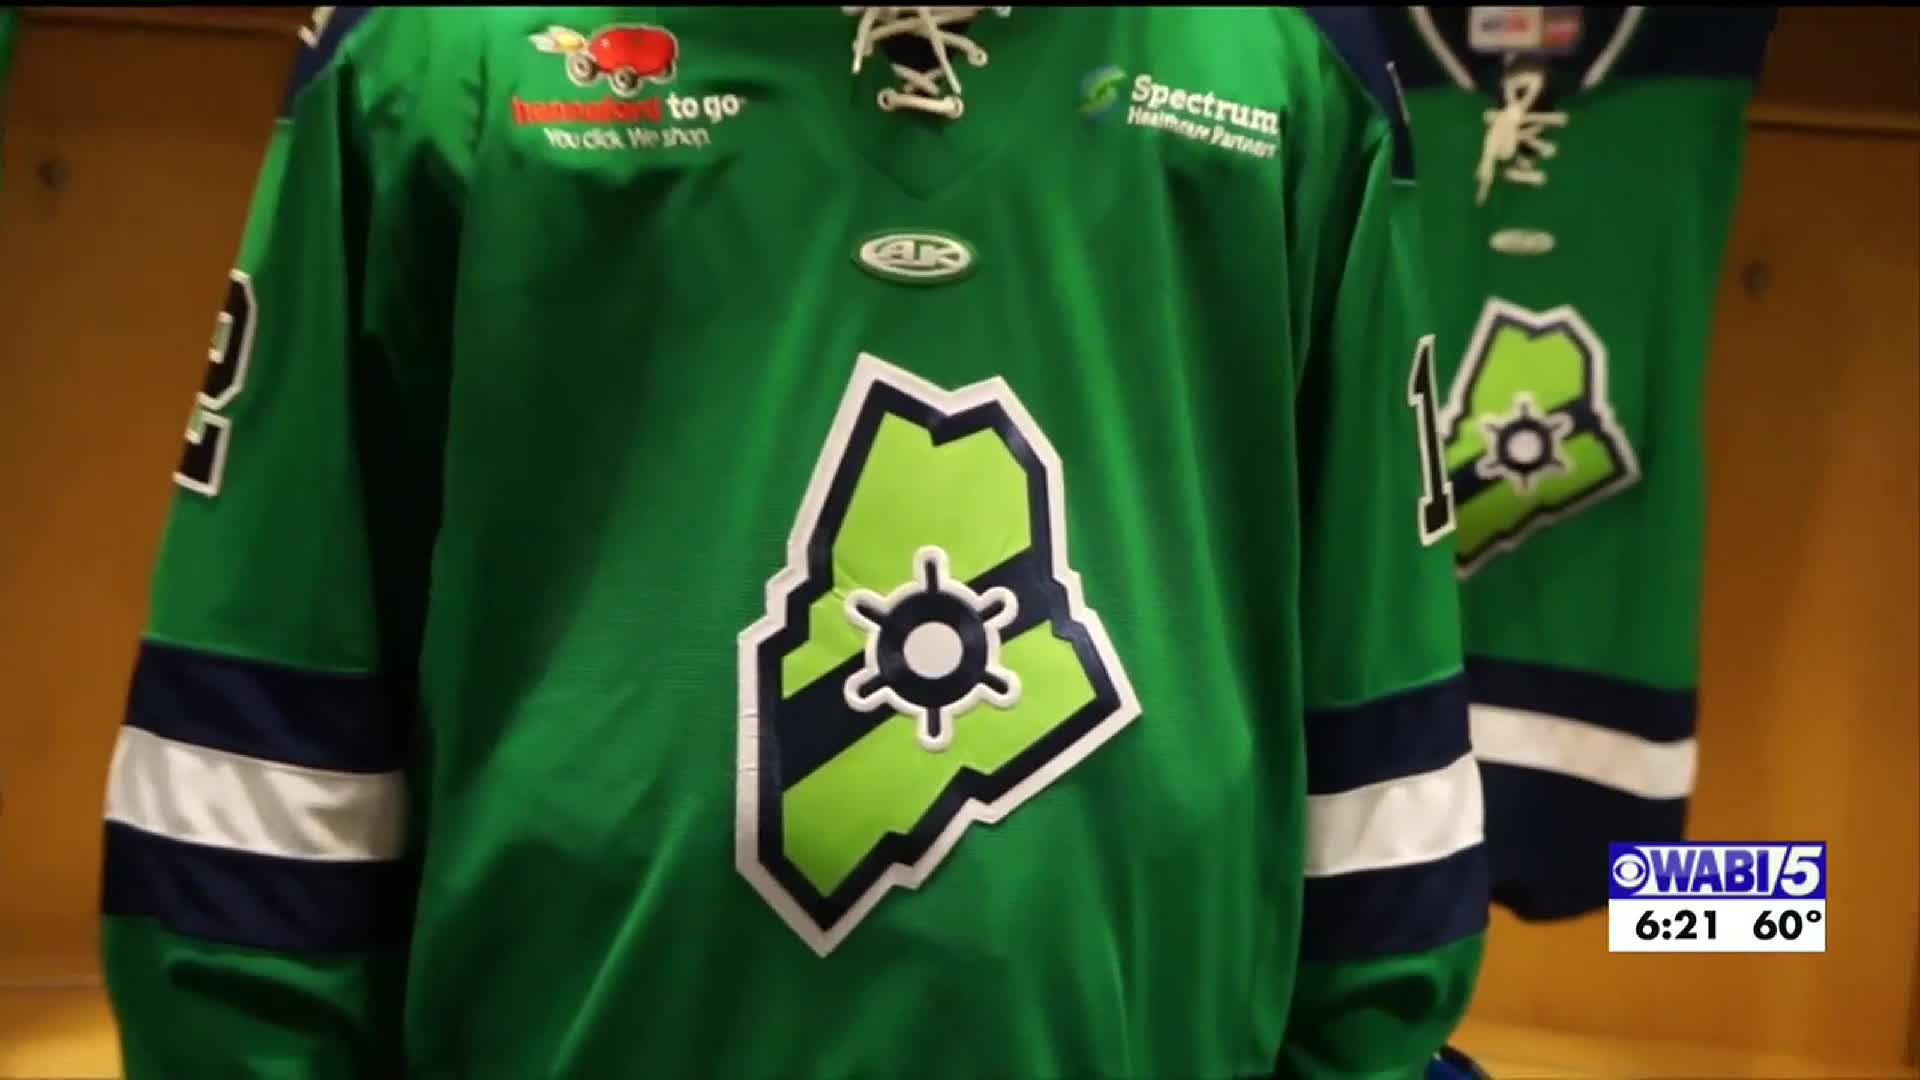 Maine Mariners unveil two new jerseys during homestand